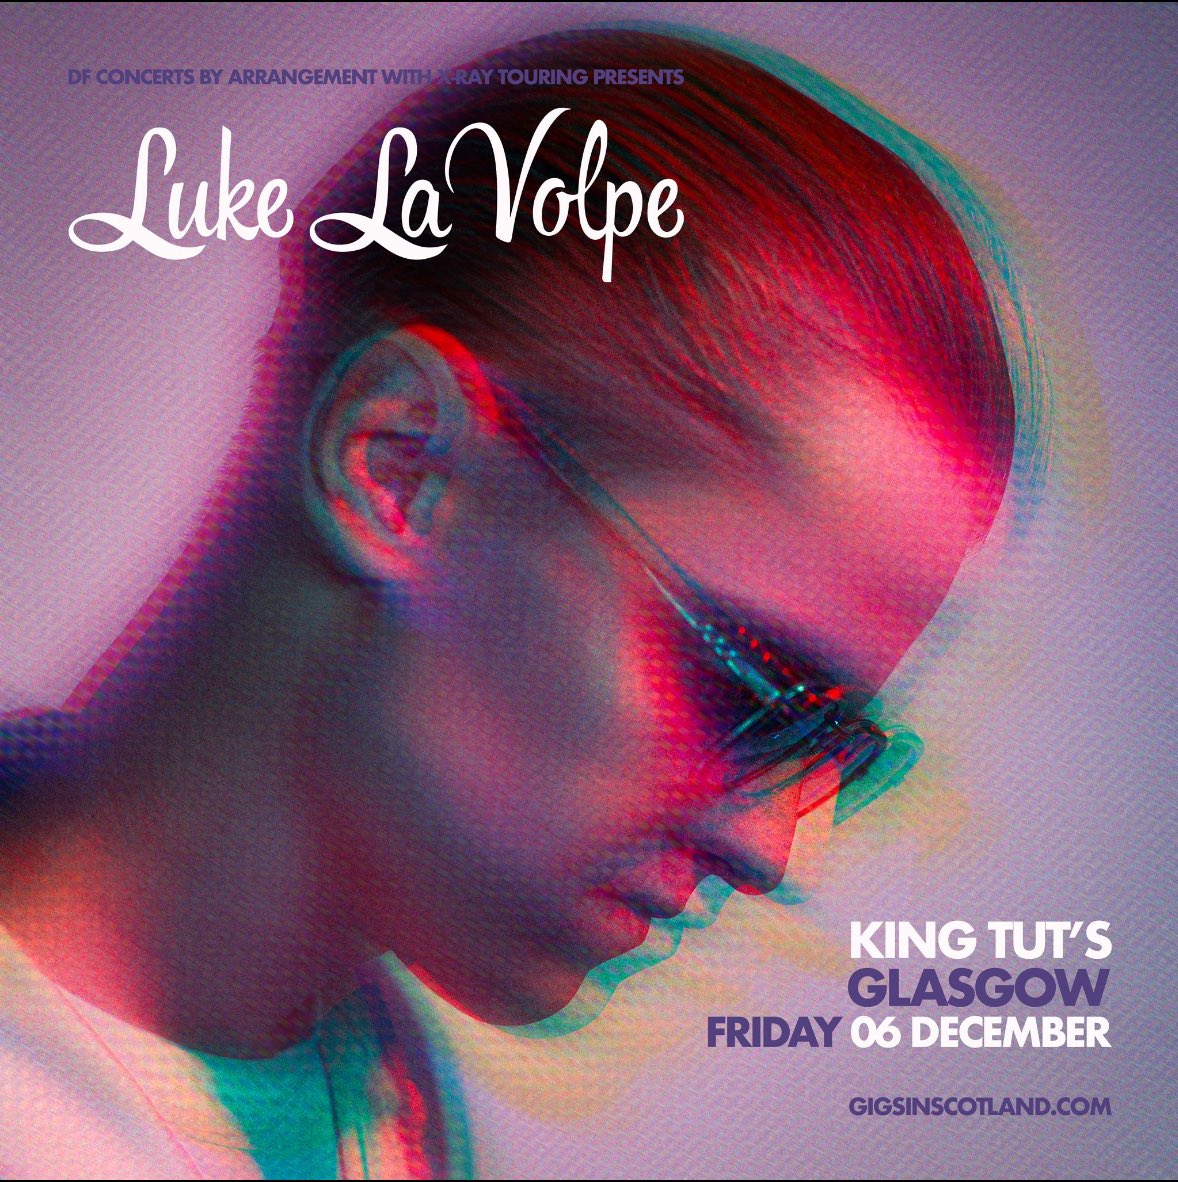 10am tomorrow for @kingtuts tickets. Get in quick to avoid disappointment! Going to be a topper. Get tickets here gigsinscotland.com/artist/luke-la… @gigsinscotland